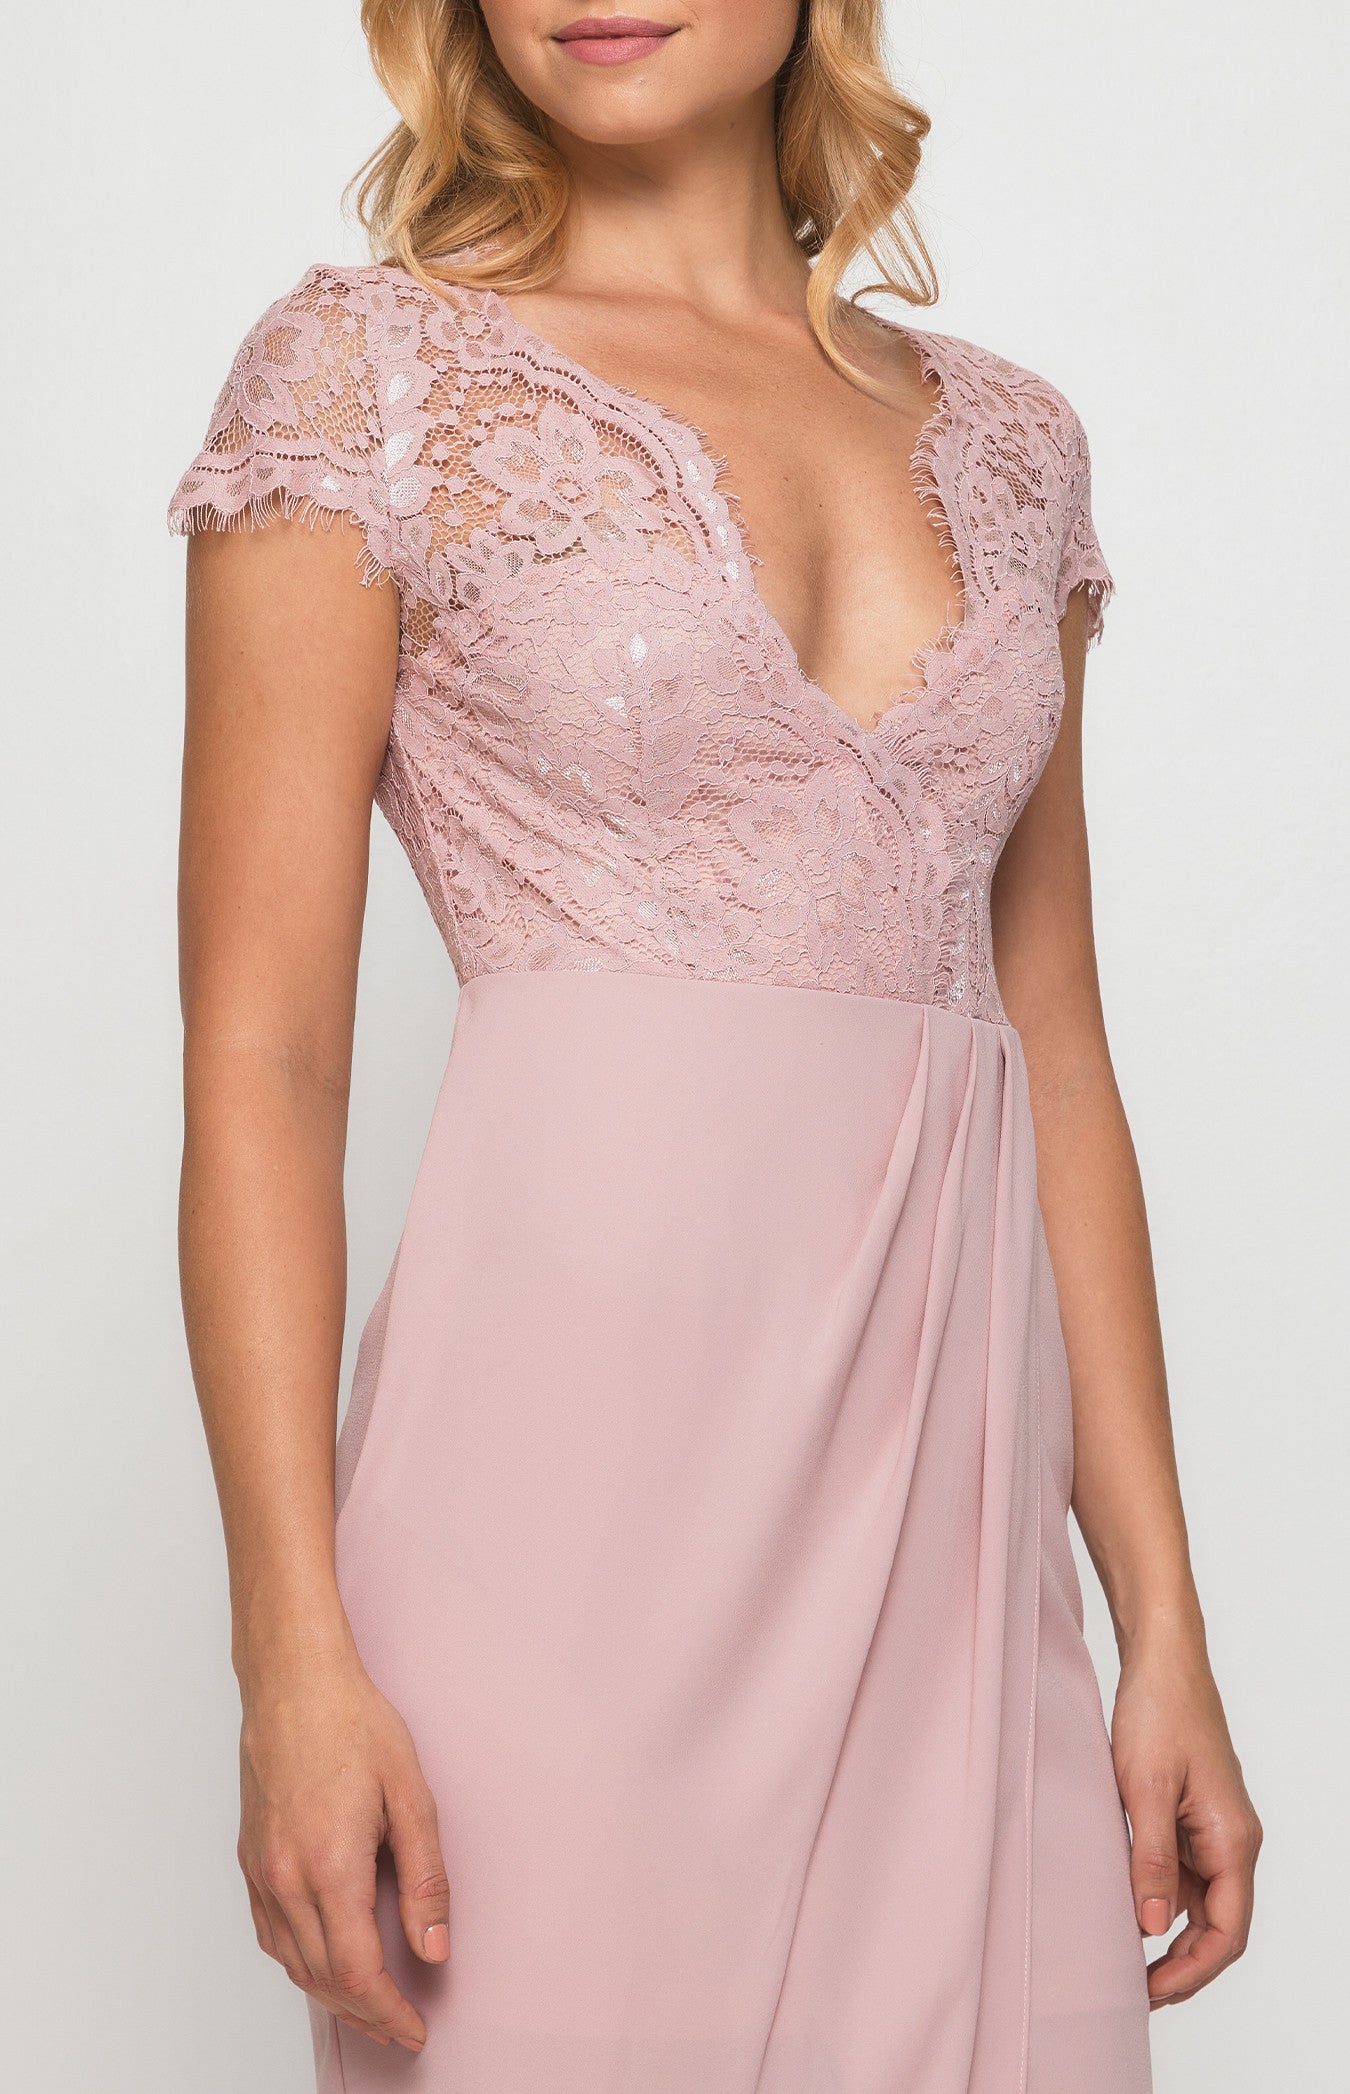 Asymmetric Hemline with Embroidery Lace Top - Blush